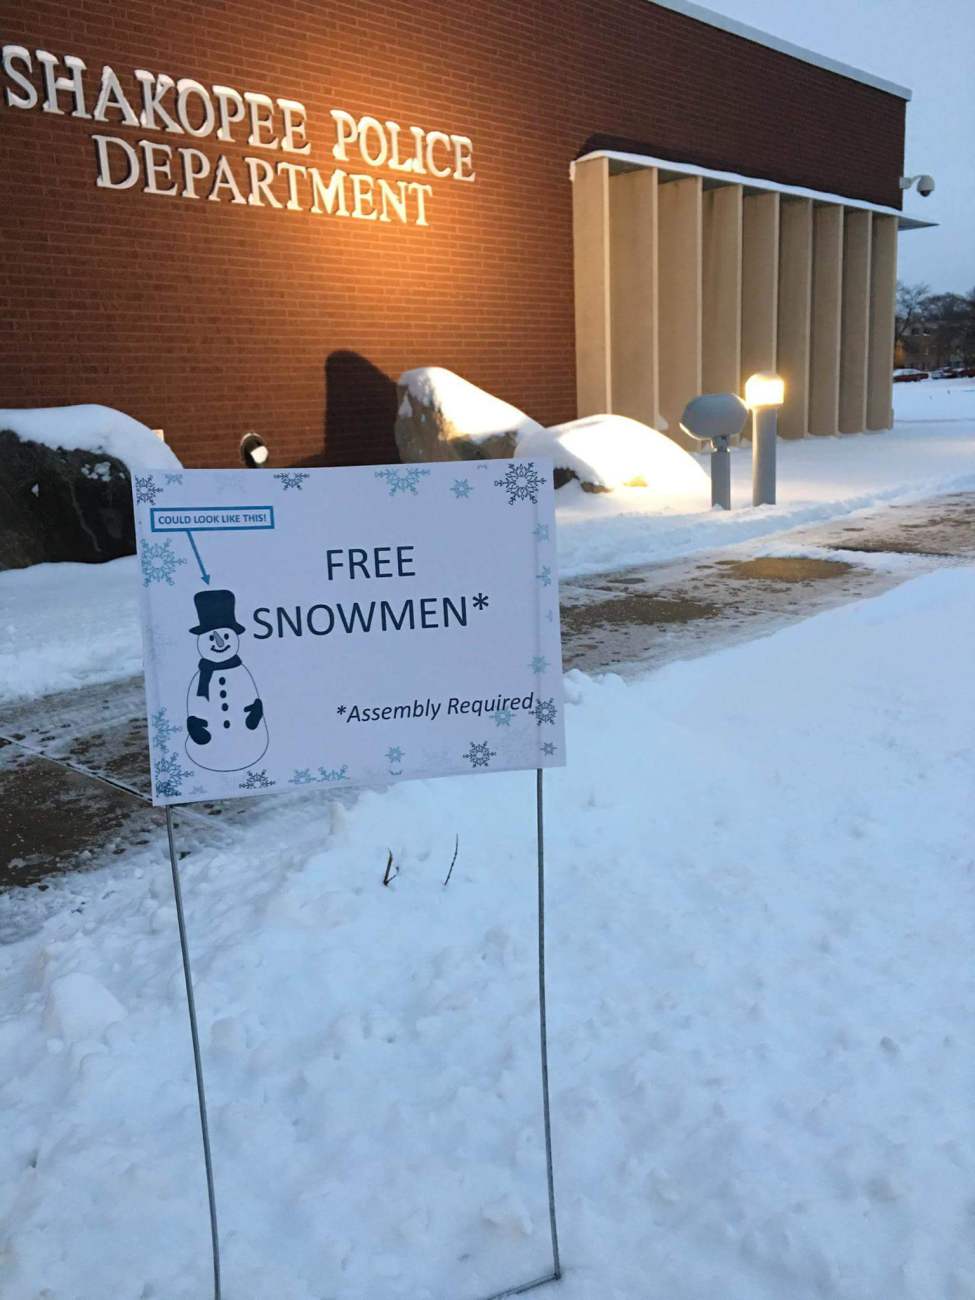 funny snowman some assembly required - Shakopee Police Department Could Look This! Free Snowmen Assembly Required